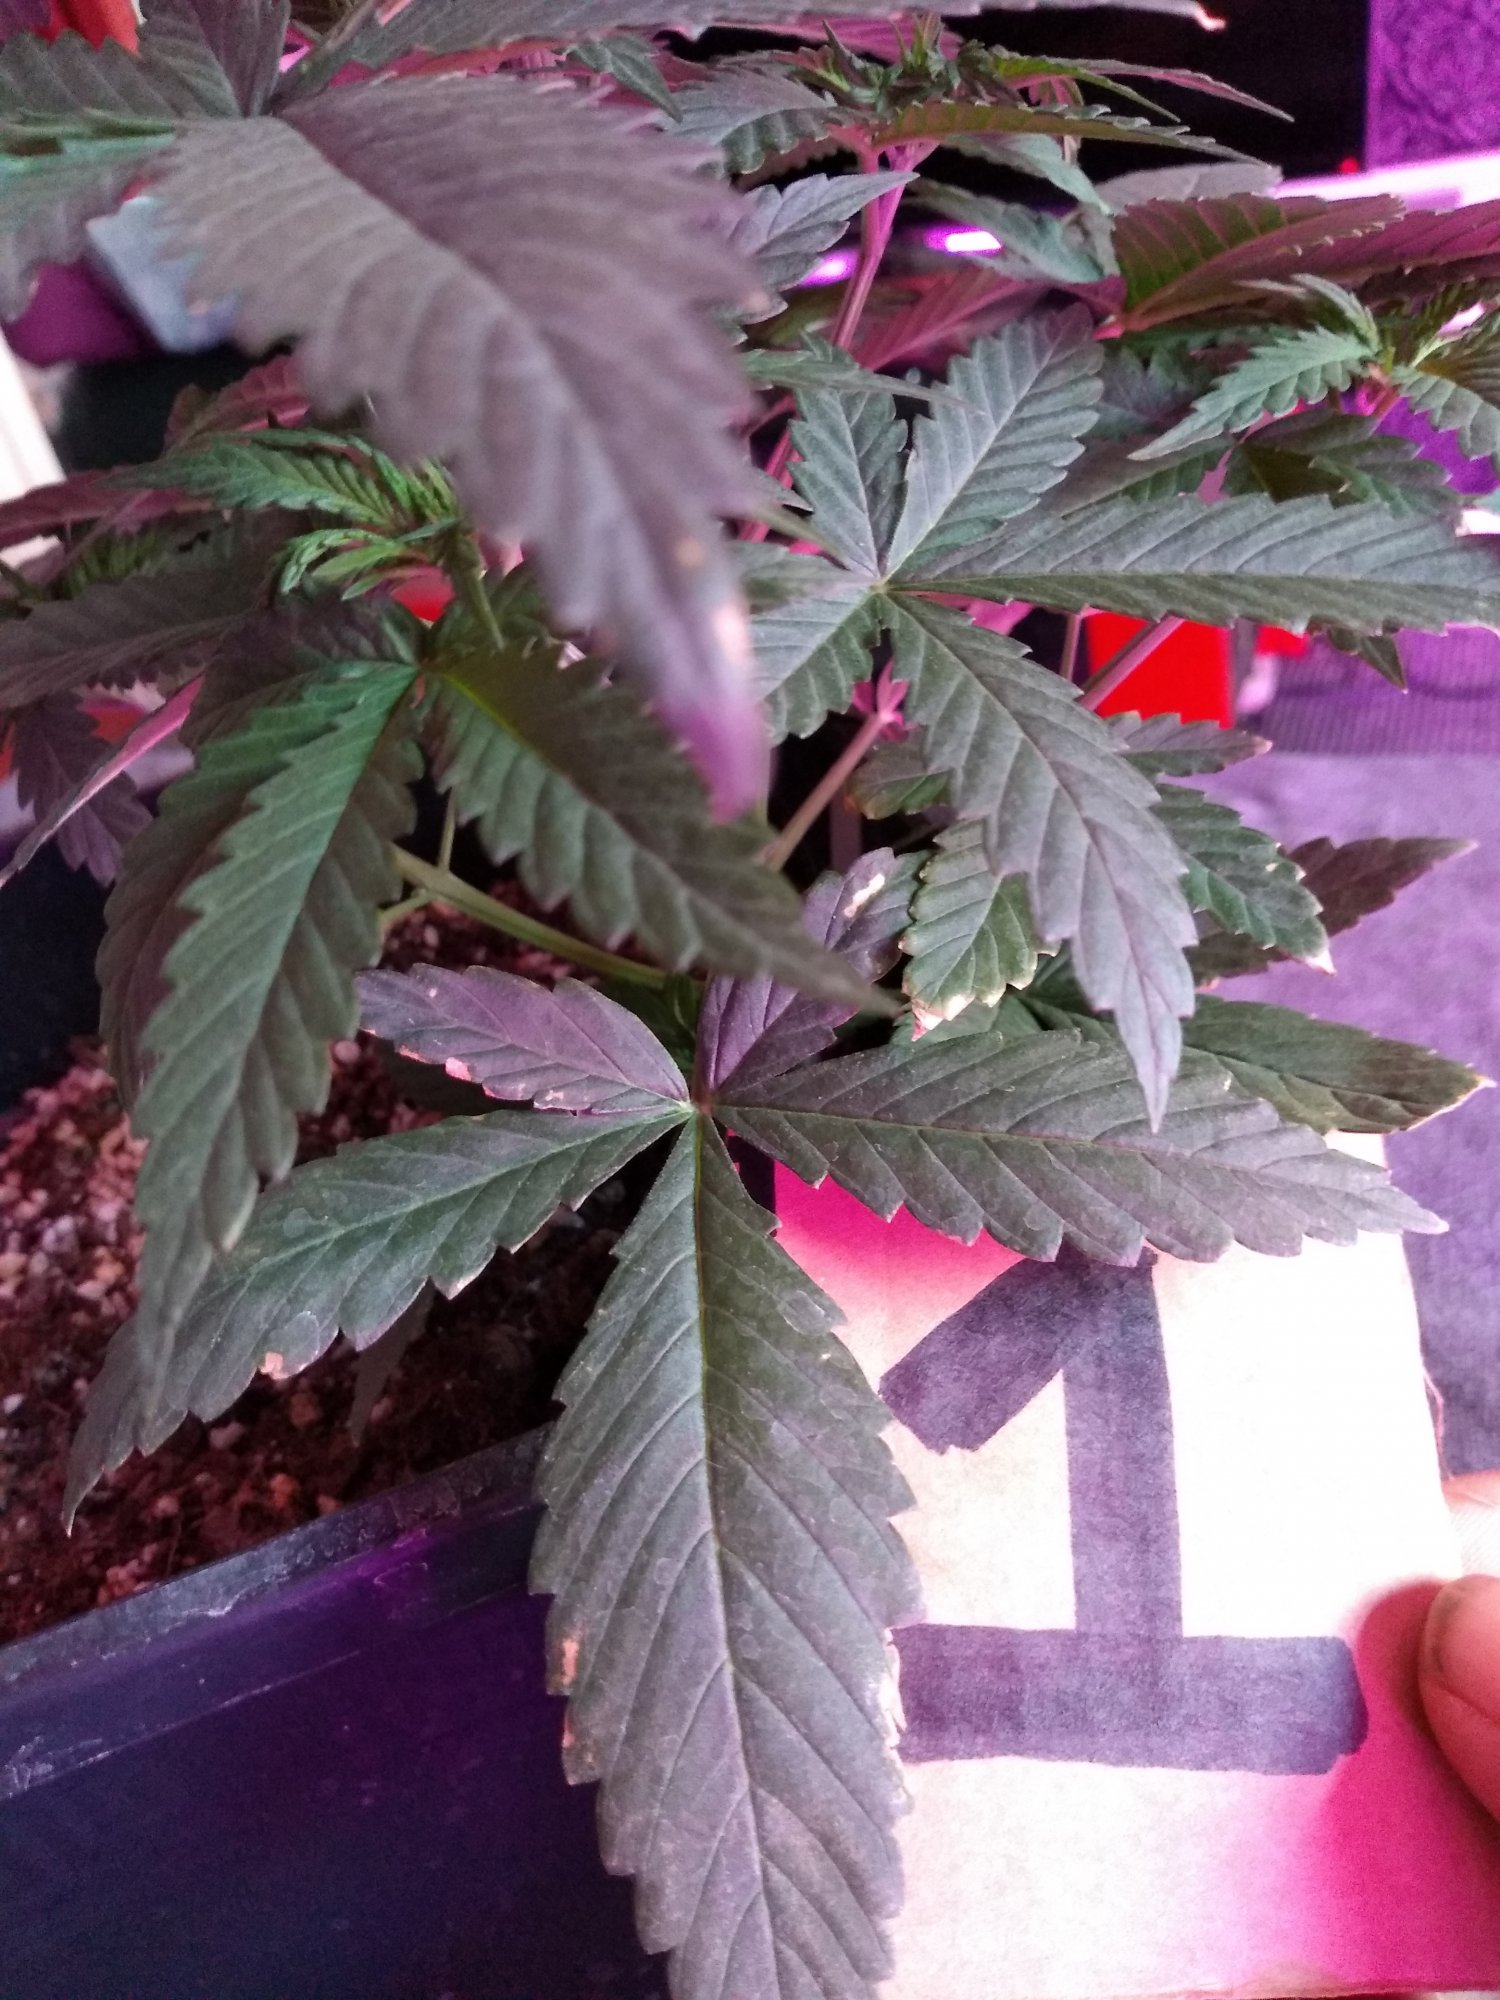 New grower   mistakes have been made 8